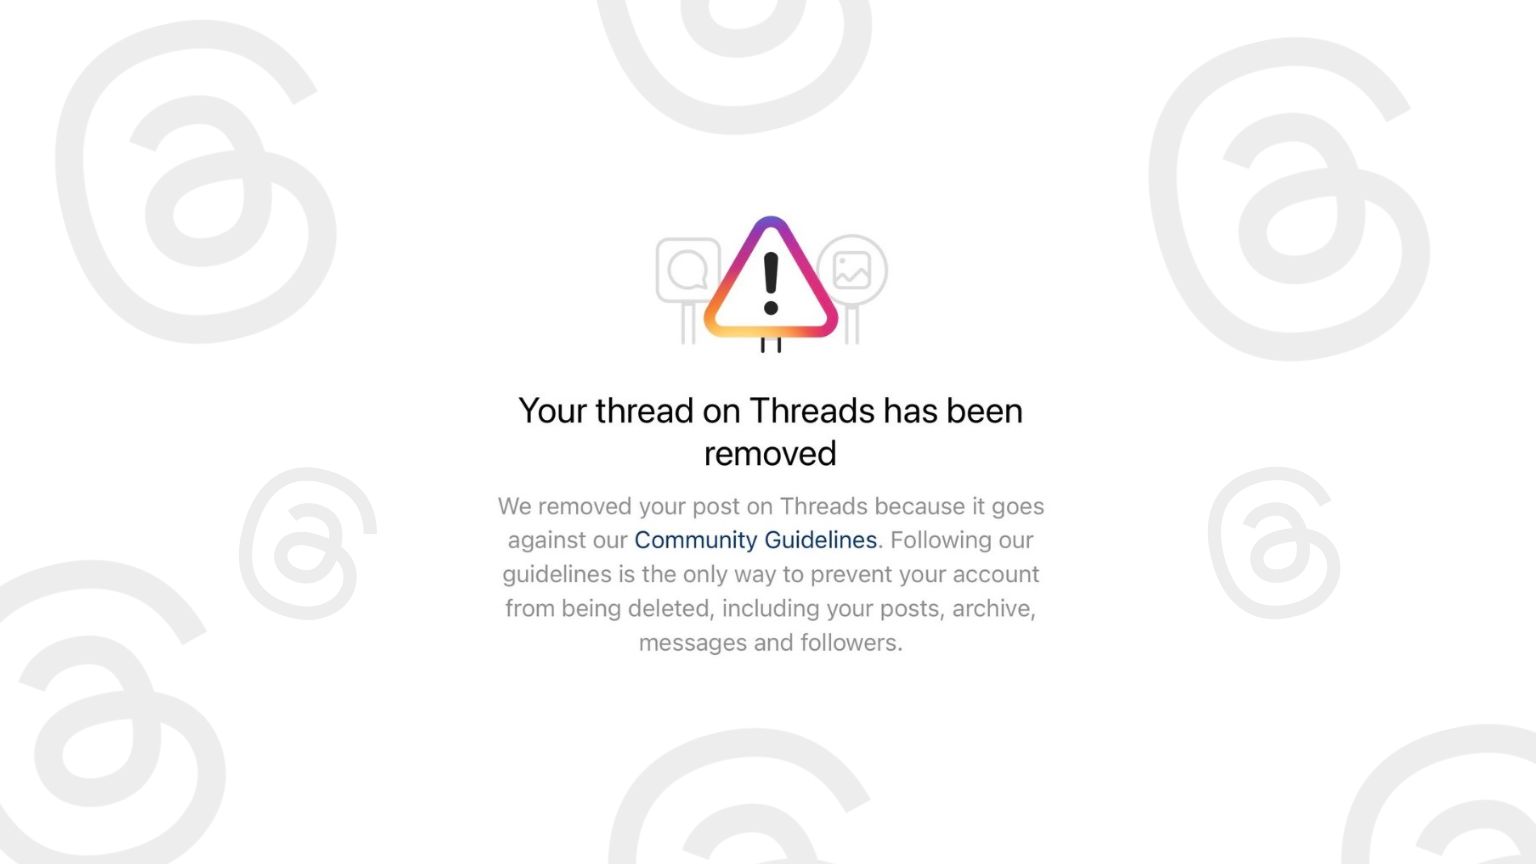 Meta’s New Threads App is Censoring From Day One